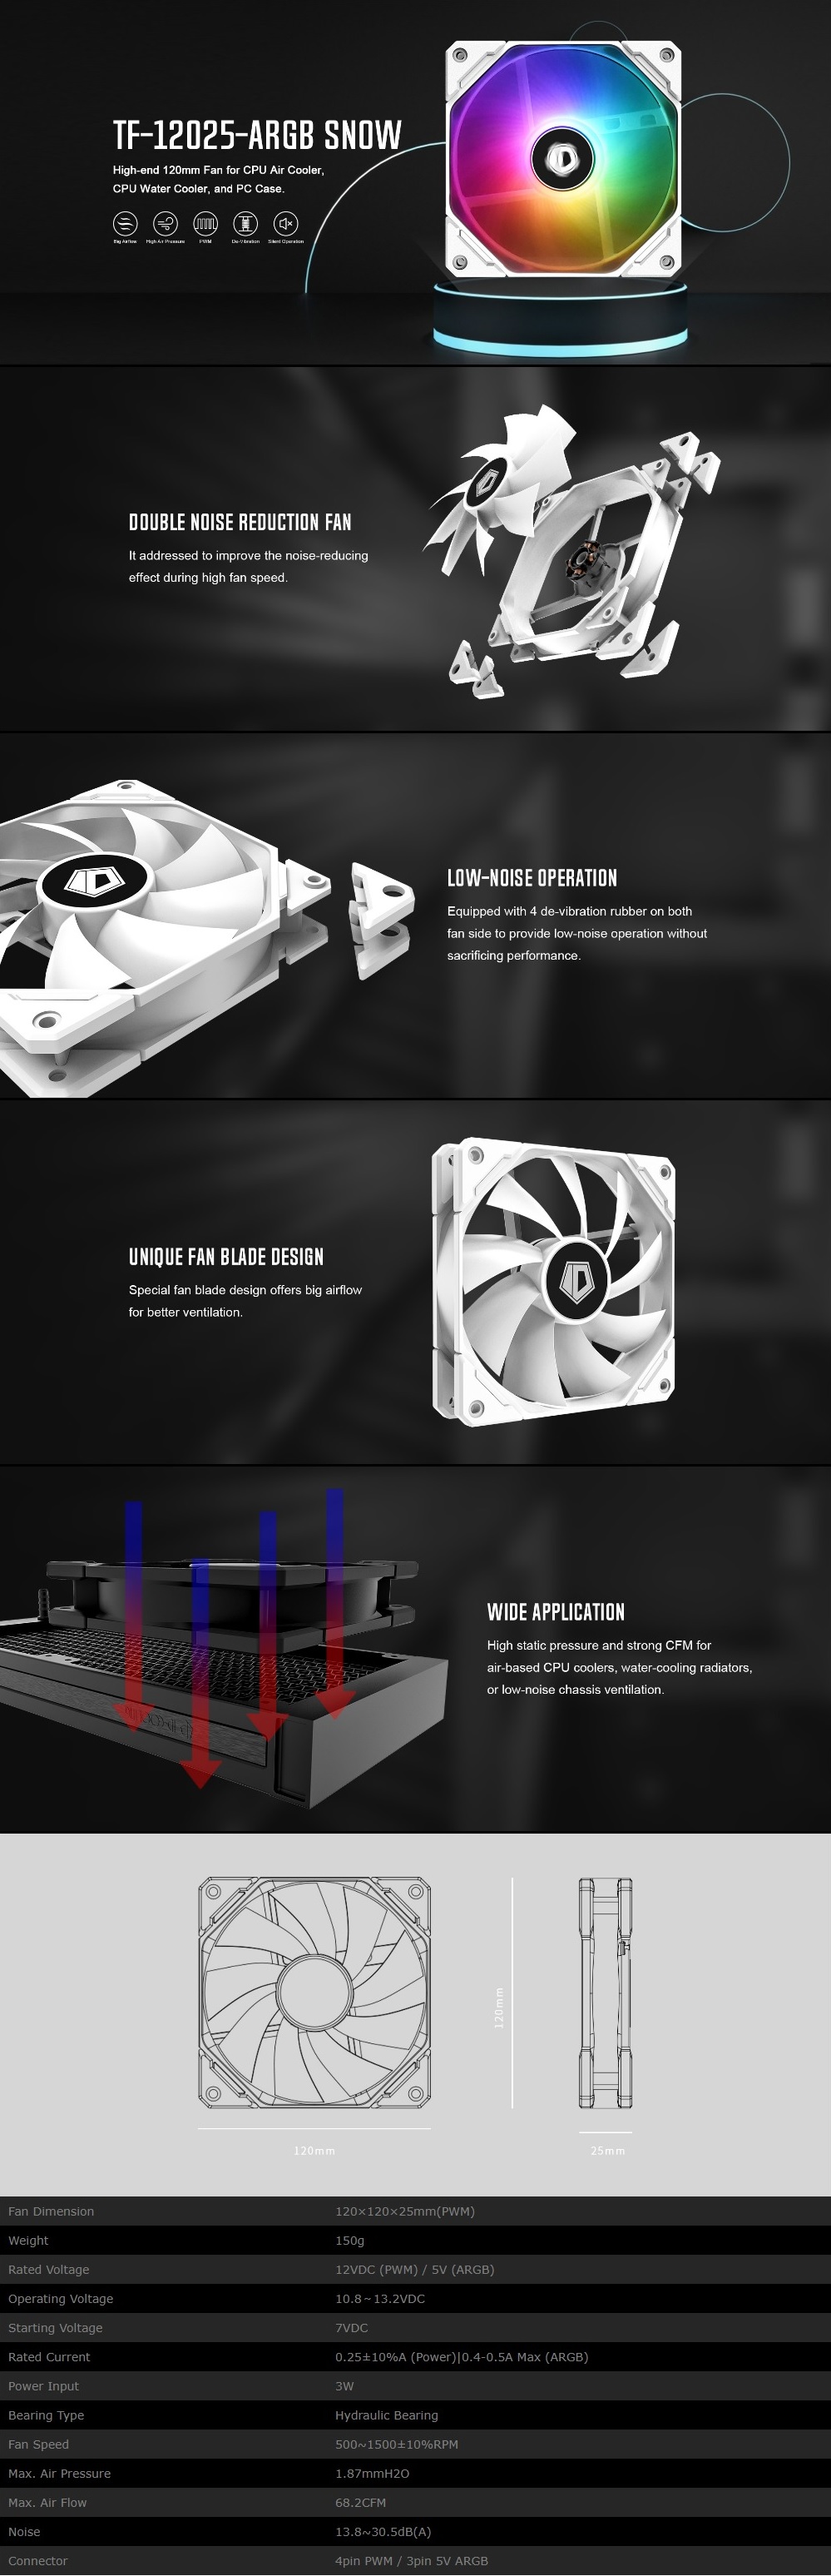 A large marketing image providing additional information about the product ID-COOLING TF Series 120mm ARGB Case Fan - Snow Edition - Additional alt info not provided